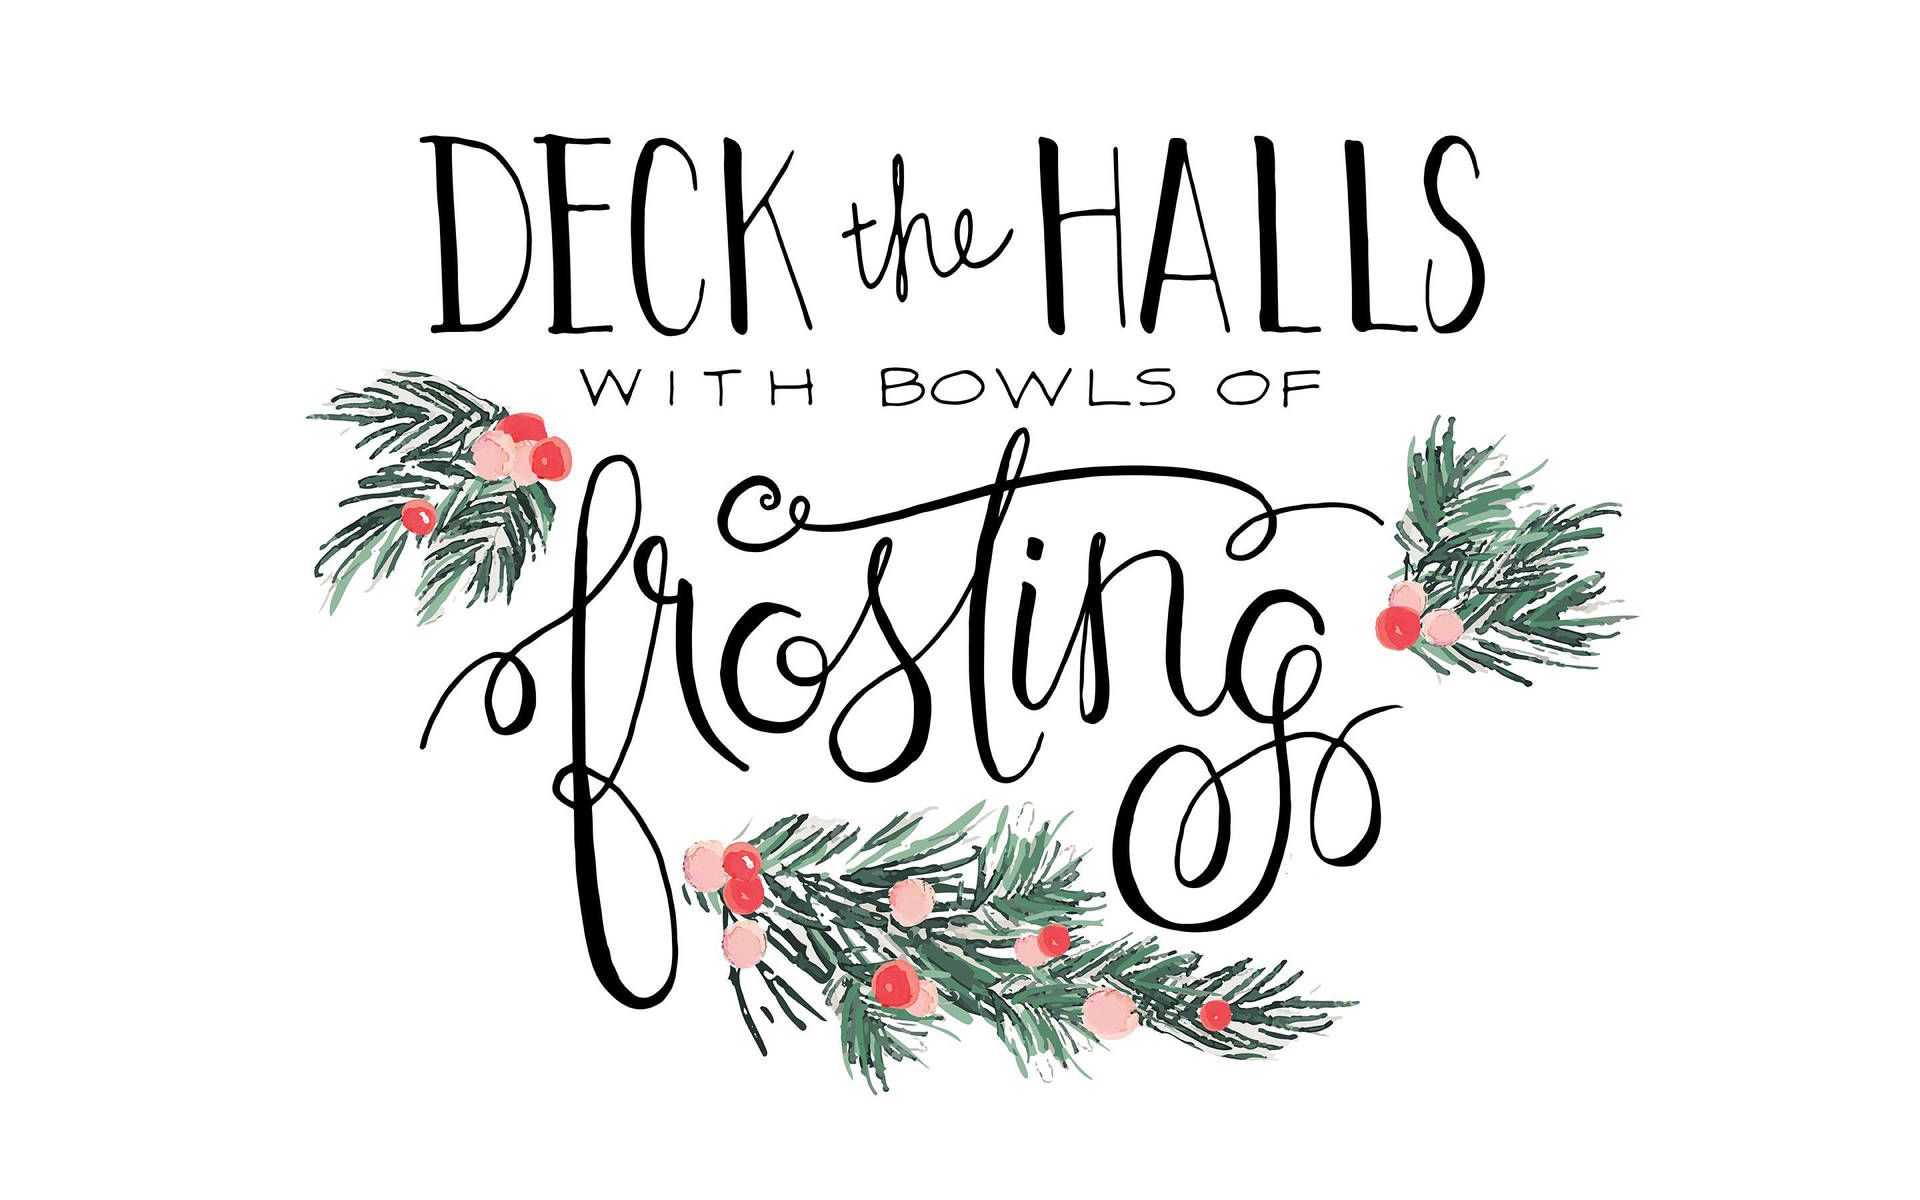 Deck the halls with bowls of frosting. - Cute Christmas